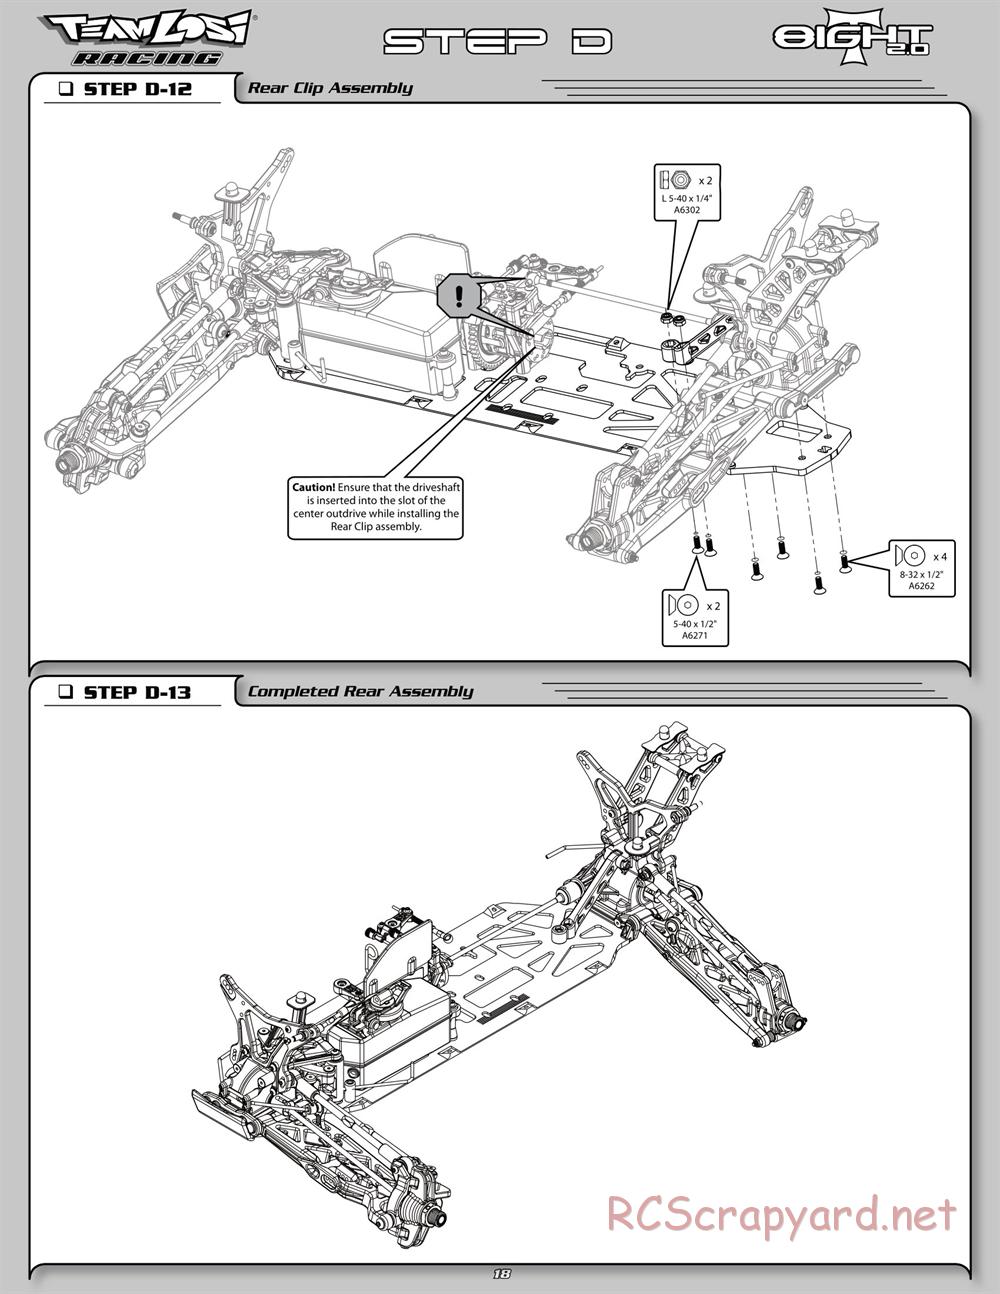 Team Losi - 8ight-T 2.0 Race Roller - Manual - Page 23